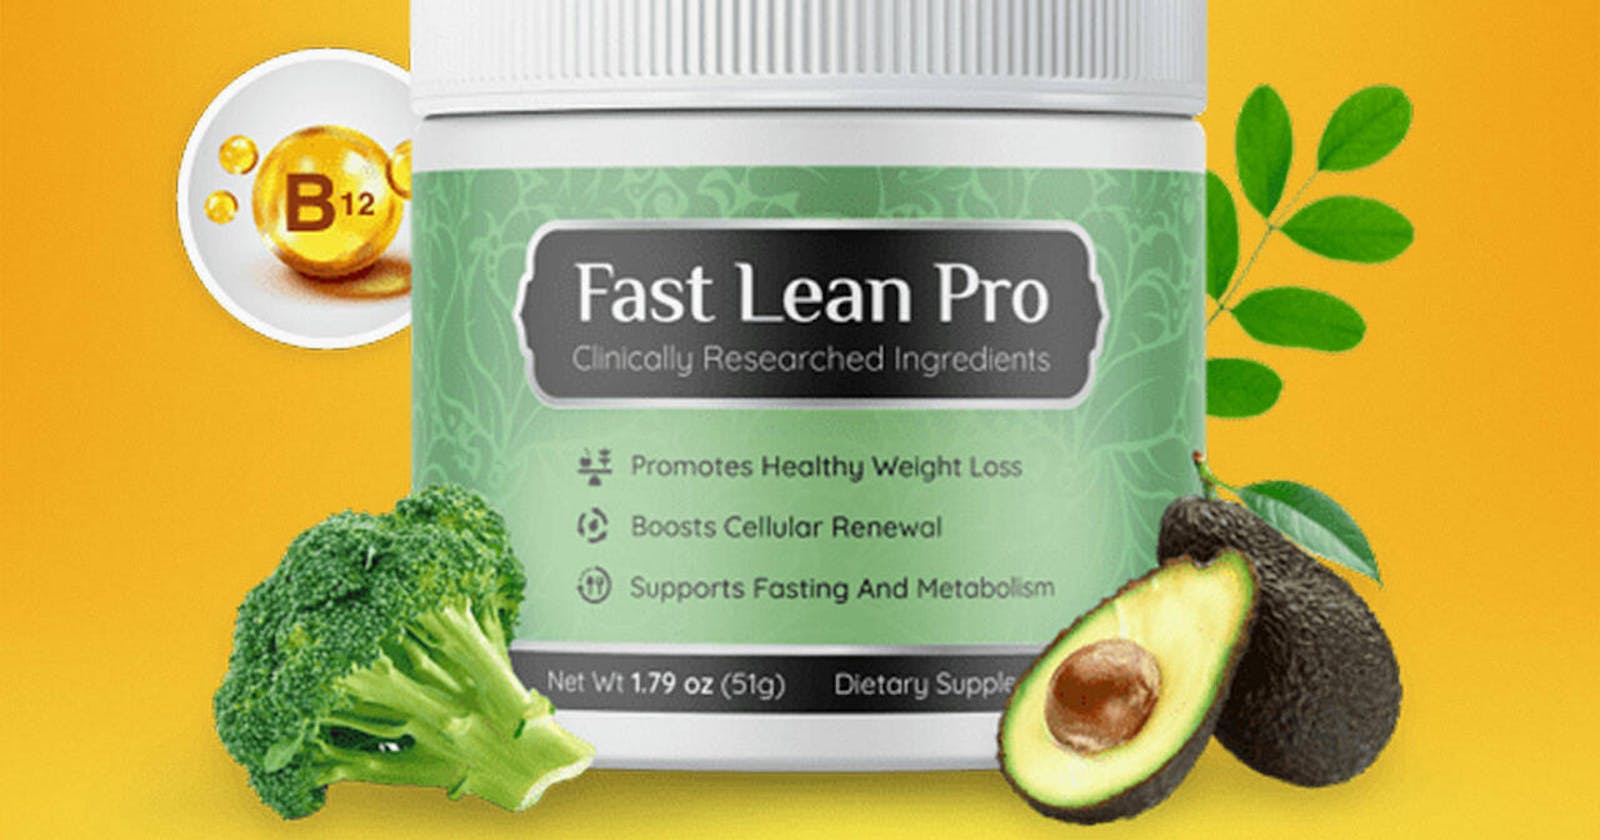 Fast Lean Pro Reviews 100% Safe To Use Legit Or Scam?